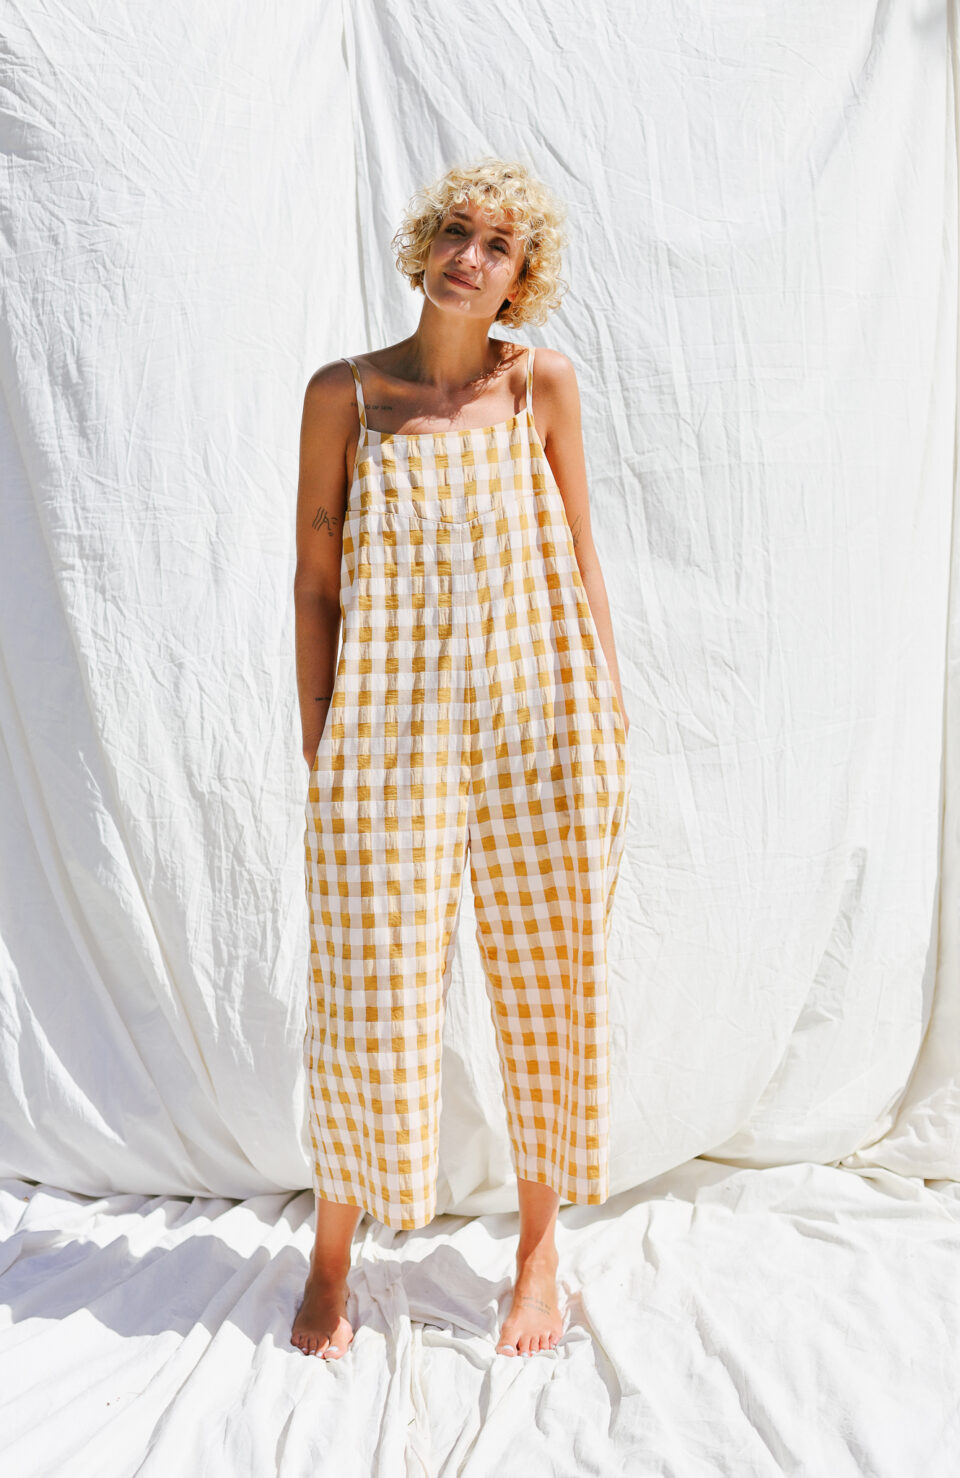 Spaghetti strap jumpsuit in seersucker gingham cotton ADA | Jumpsuits | Sustainable clothing | OffOn clothing